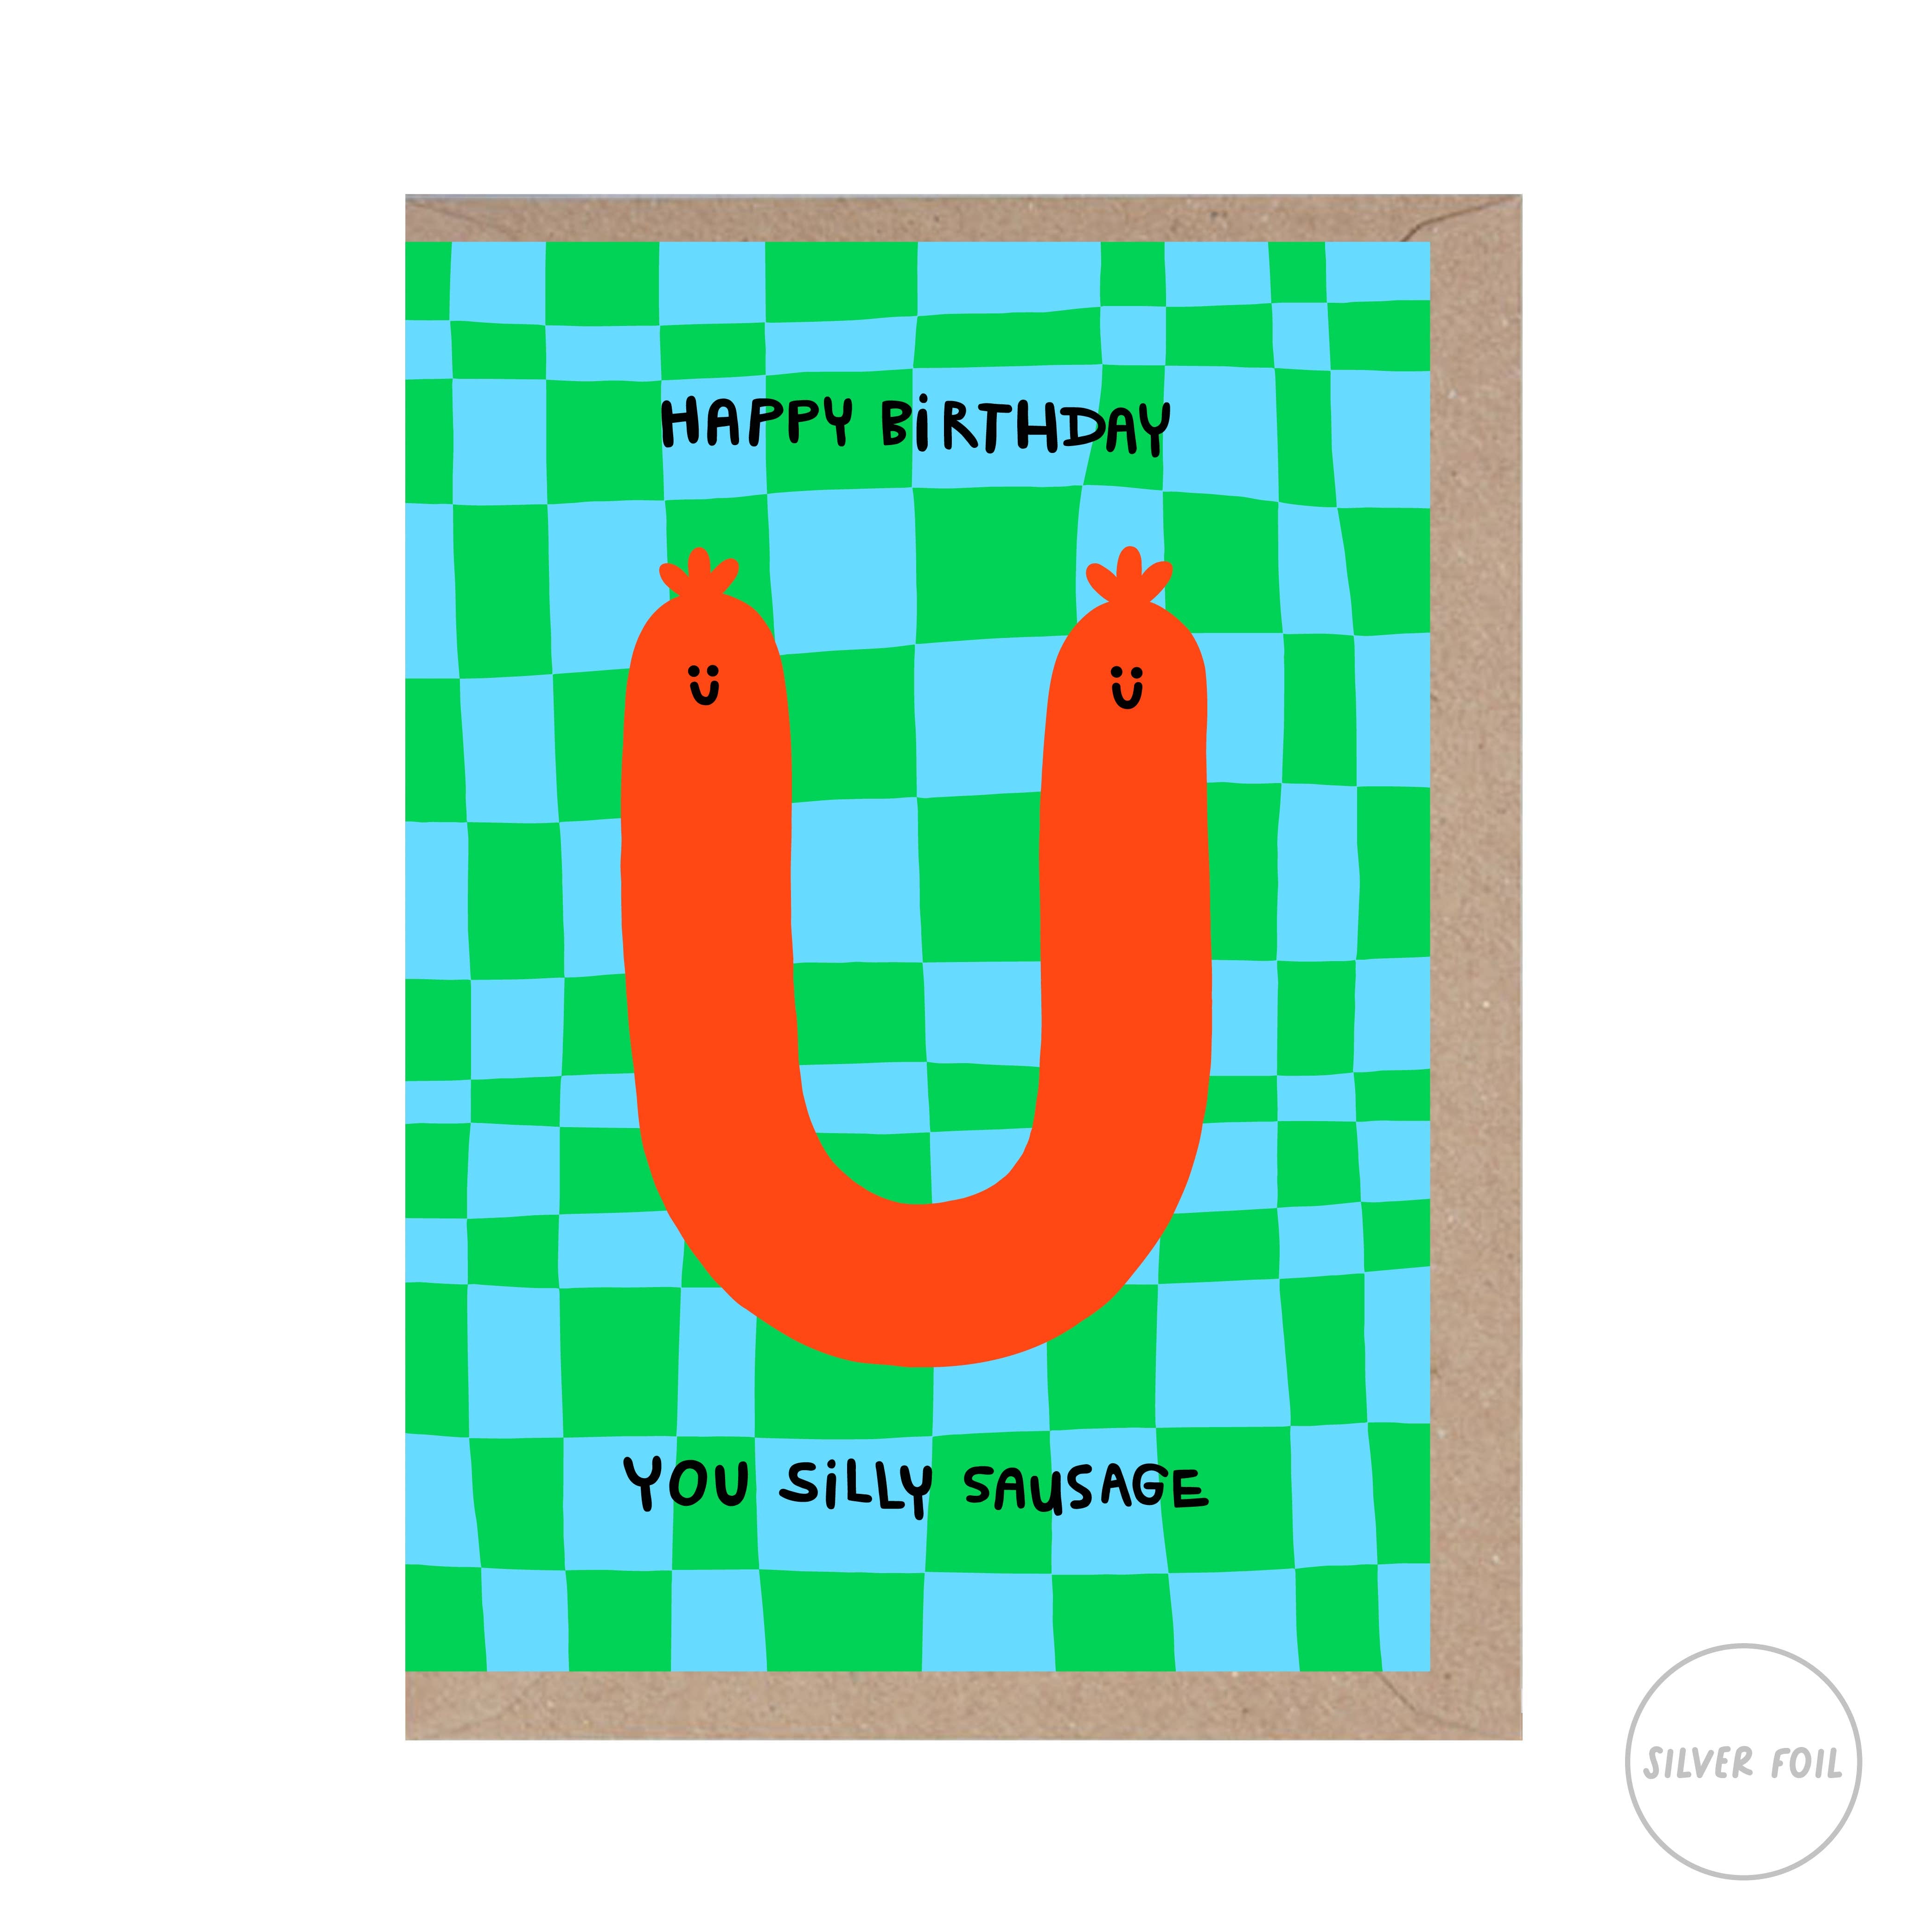 Greeting Card - Happy Birthday You Silly Sausage